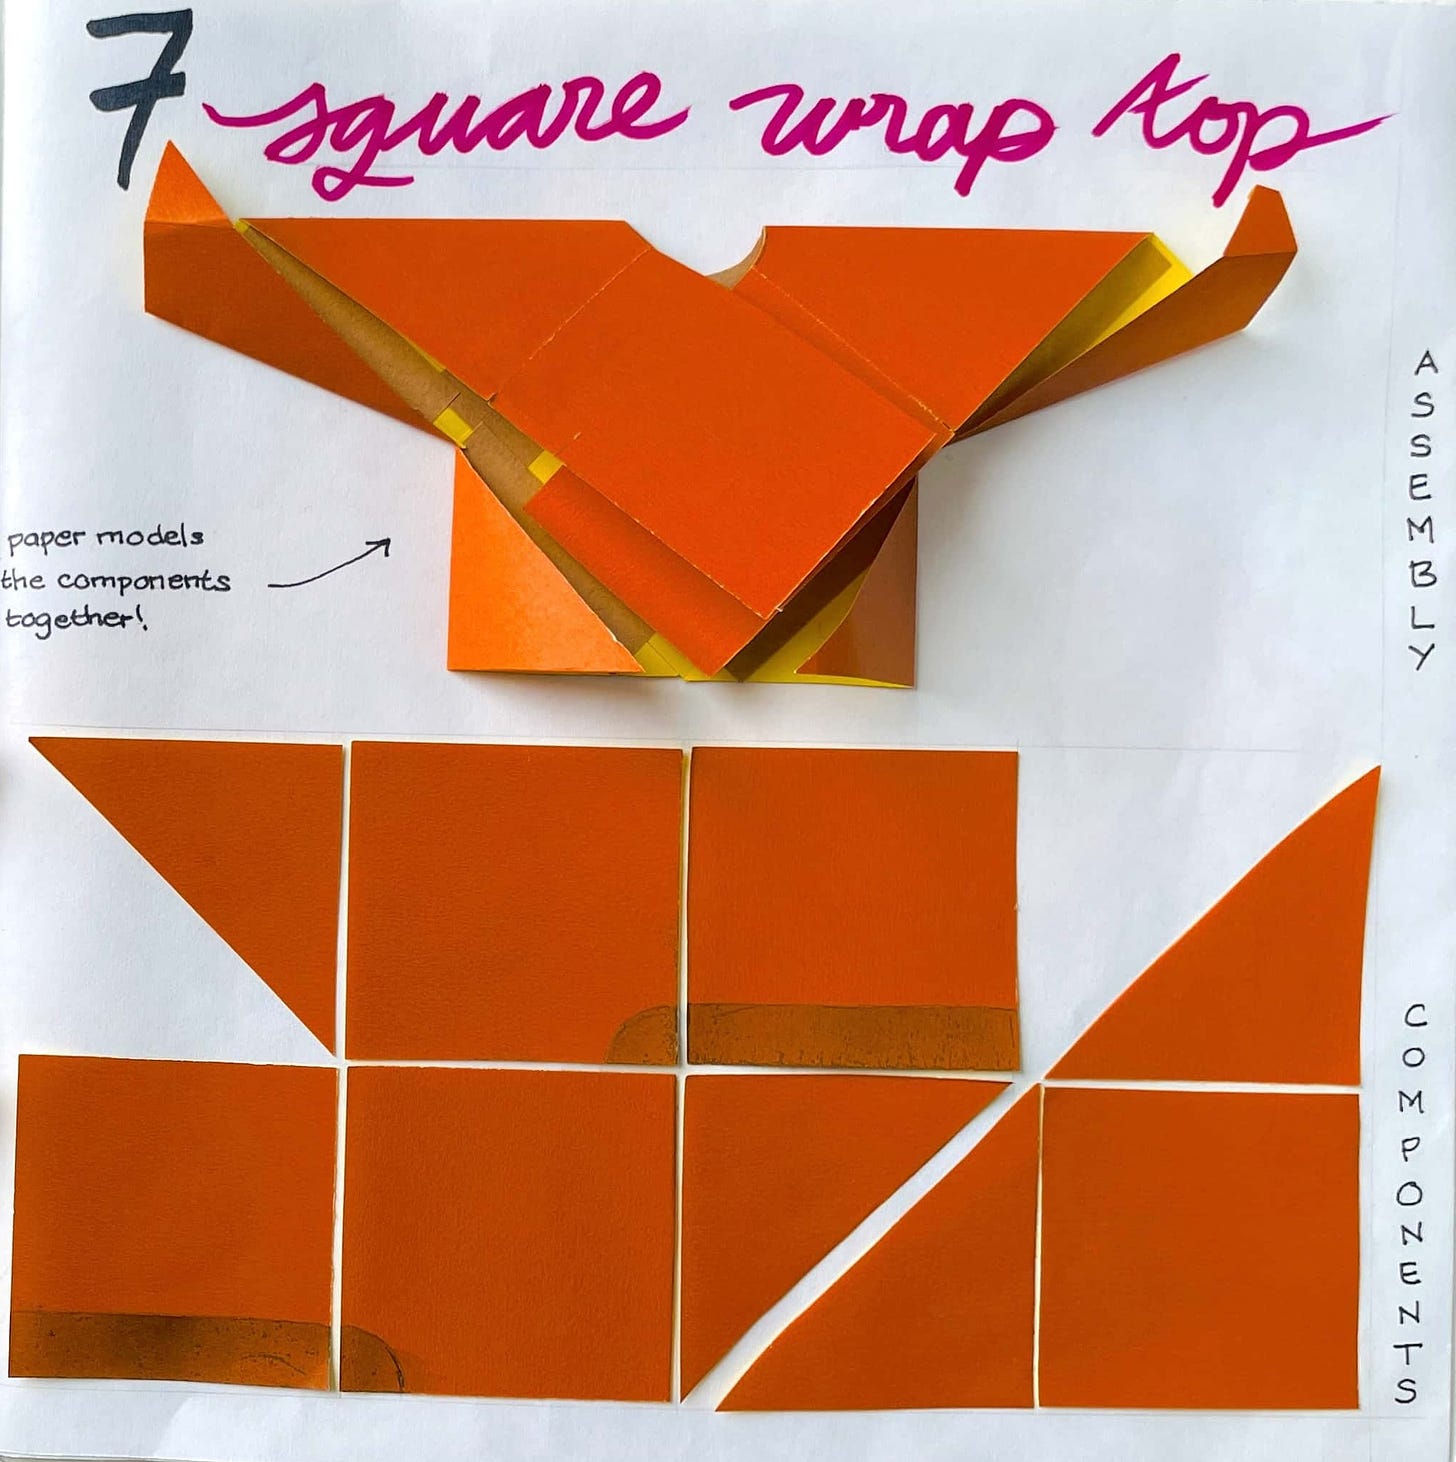 Paper model of 7-Square Wrap Top